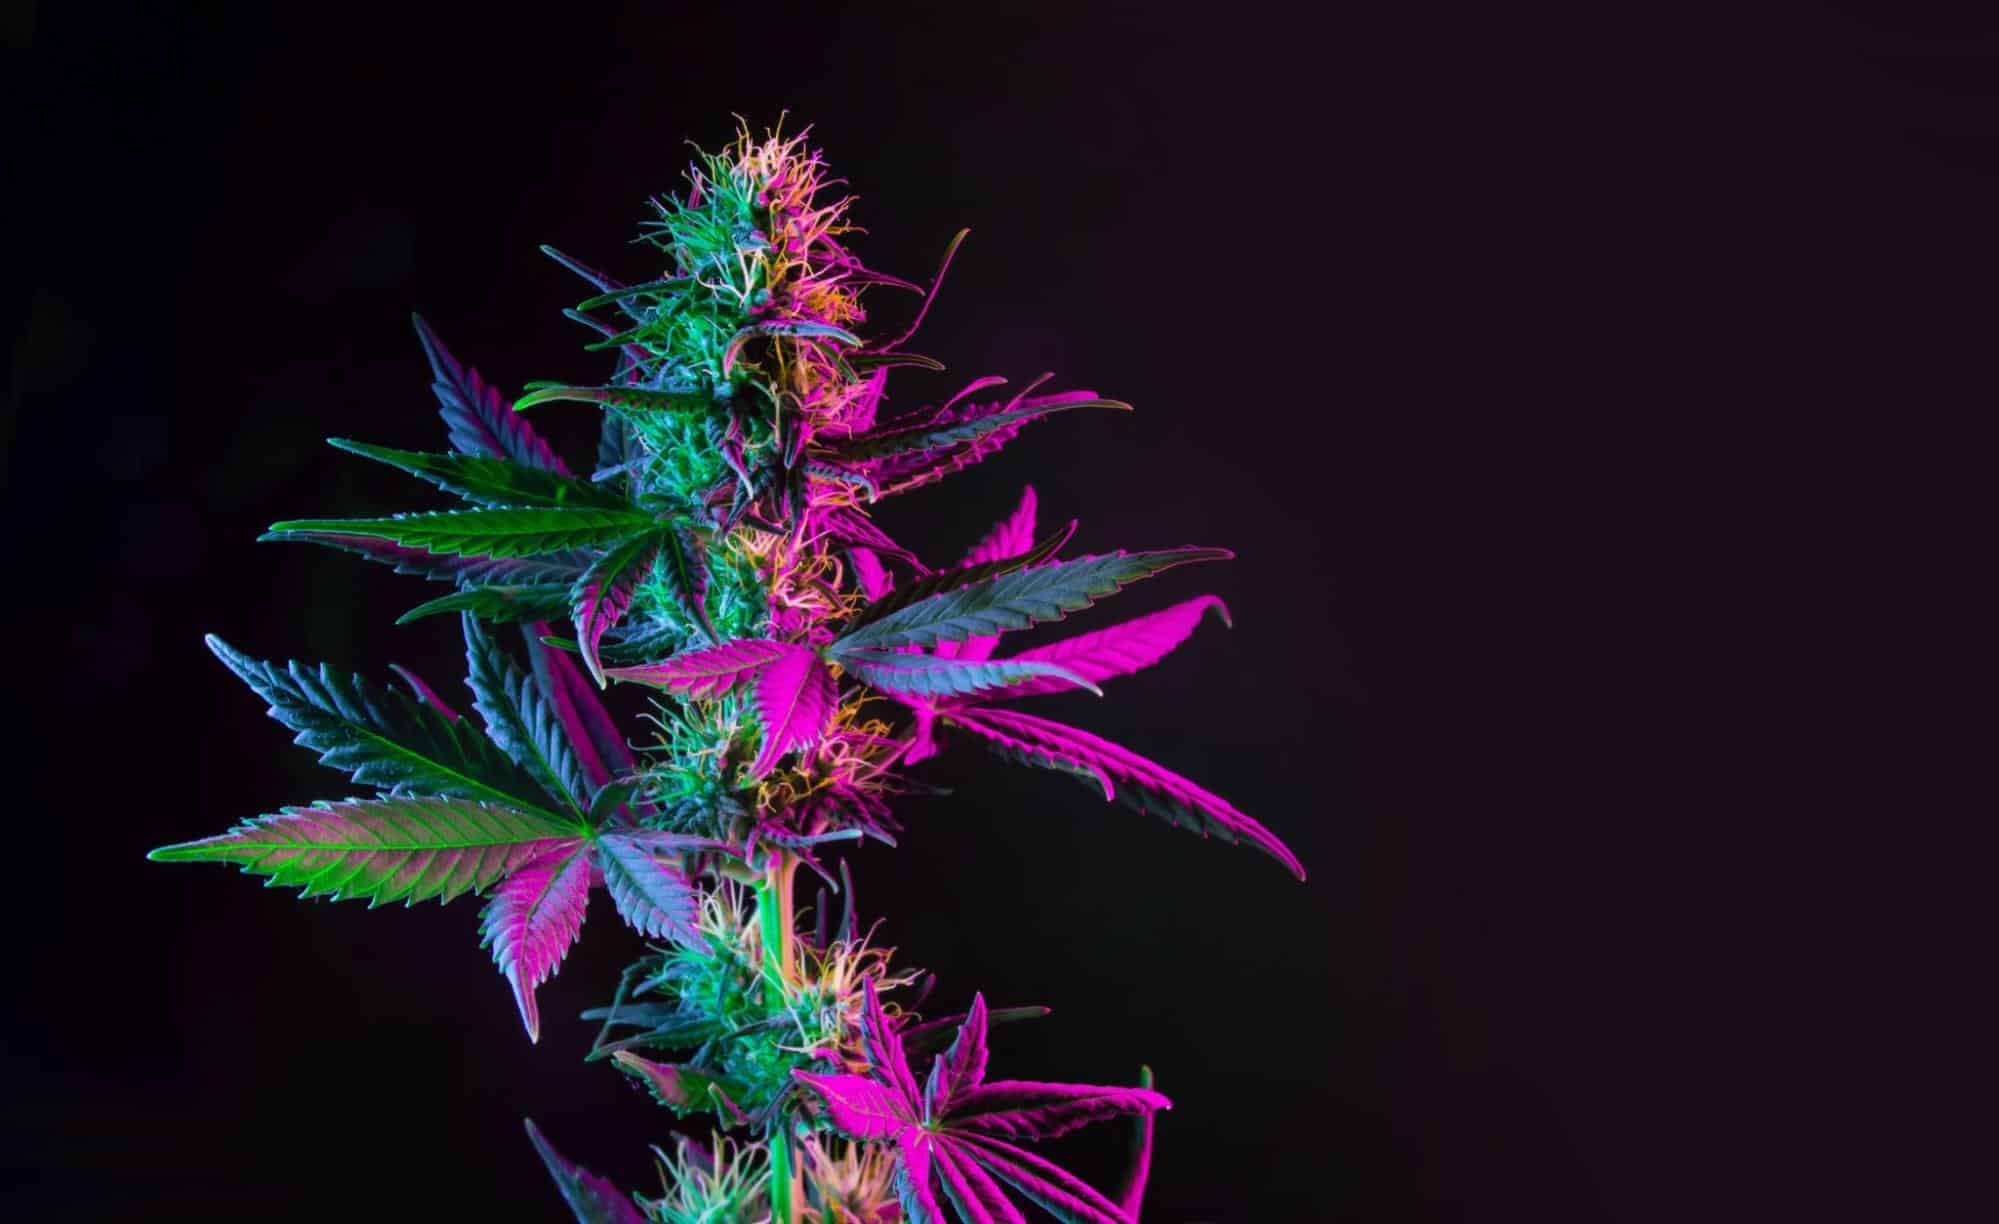 Tall, majestic cannabis leaves with a striking purple hue, and visible threads of orange hair on weed that add a touch of vibrant color and detail.